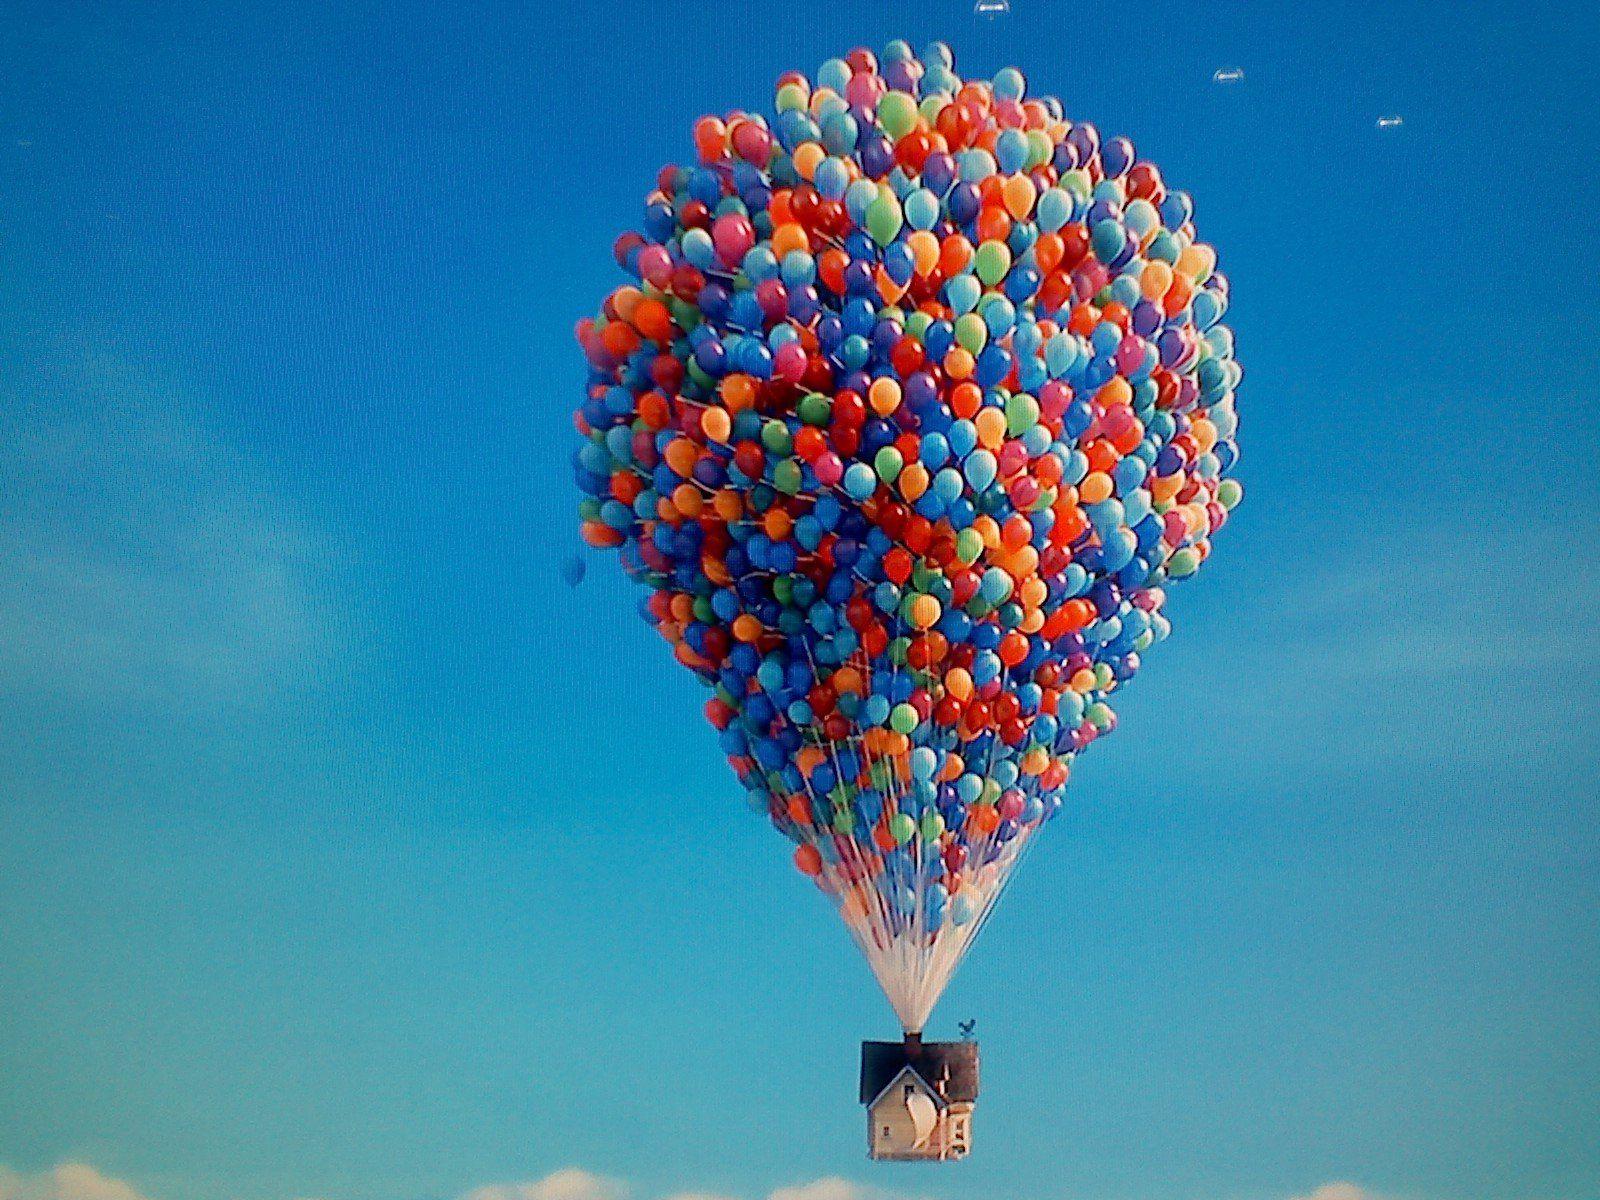 Up Movie Wallpapers - Top Free Up Movie Backgrounds ...